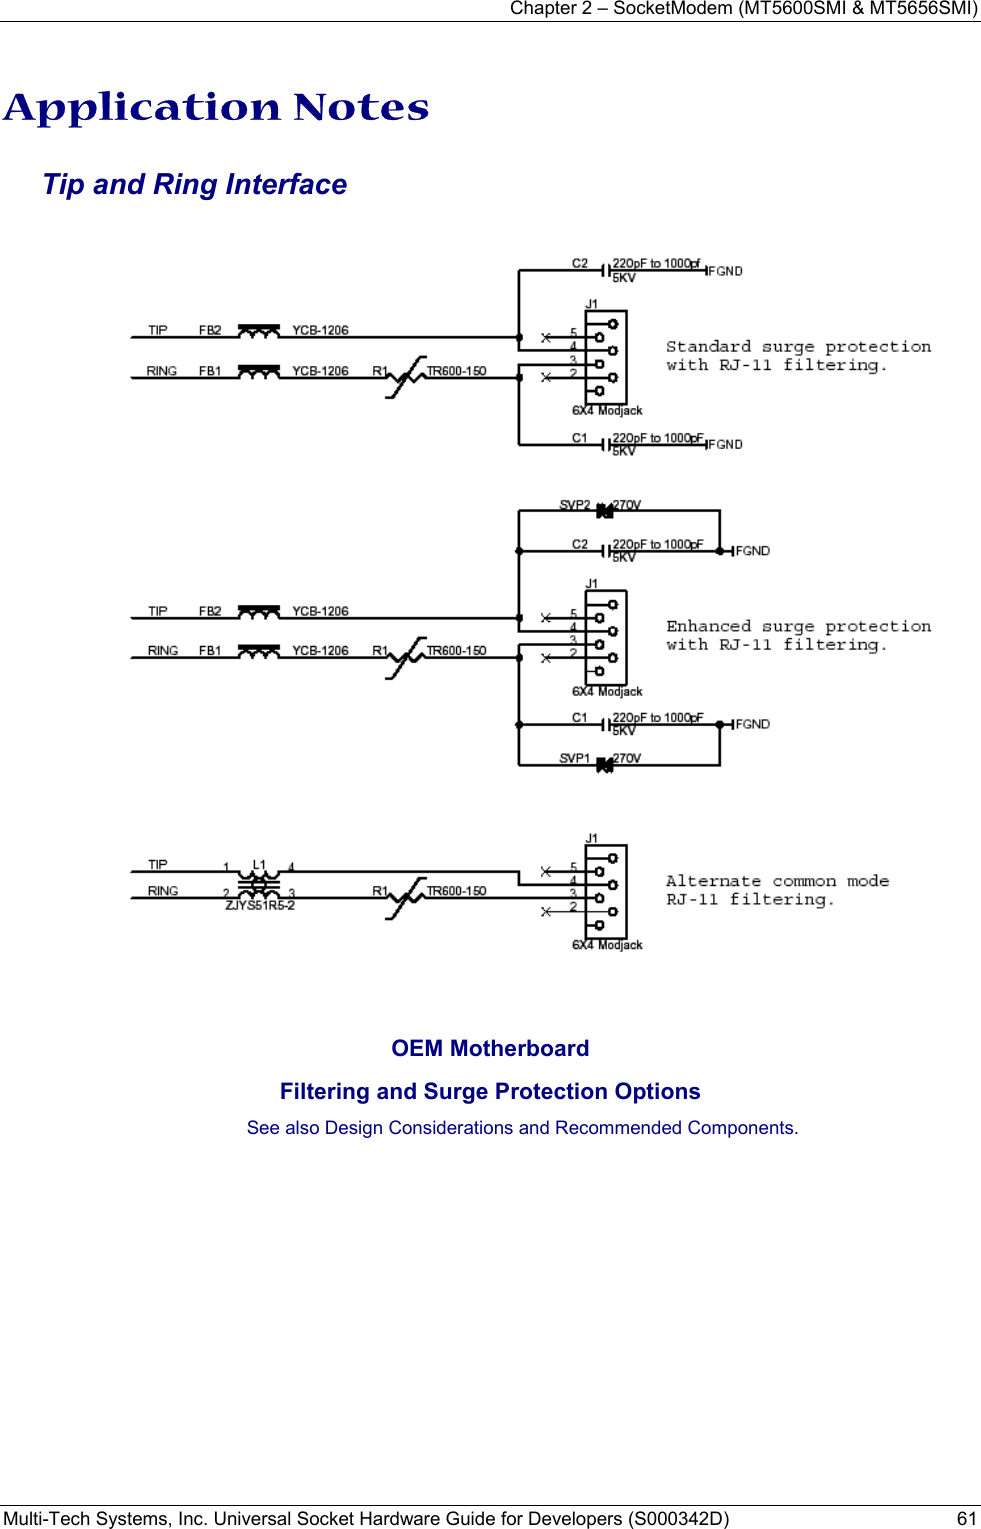 Chapter 2 – SocketModem (MT5600SMI &amp; MT5656SMI) Multi-Tech Systems, Inc. Universal Socket Hardware Guide for Developers (S000342D)  61  Application Notes Tip and Ring Interface       OEM Motherboard Filtering and Surge Protection Options See also Design Considerations and Recommended Components.